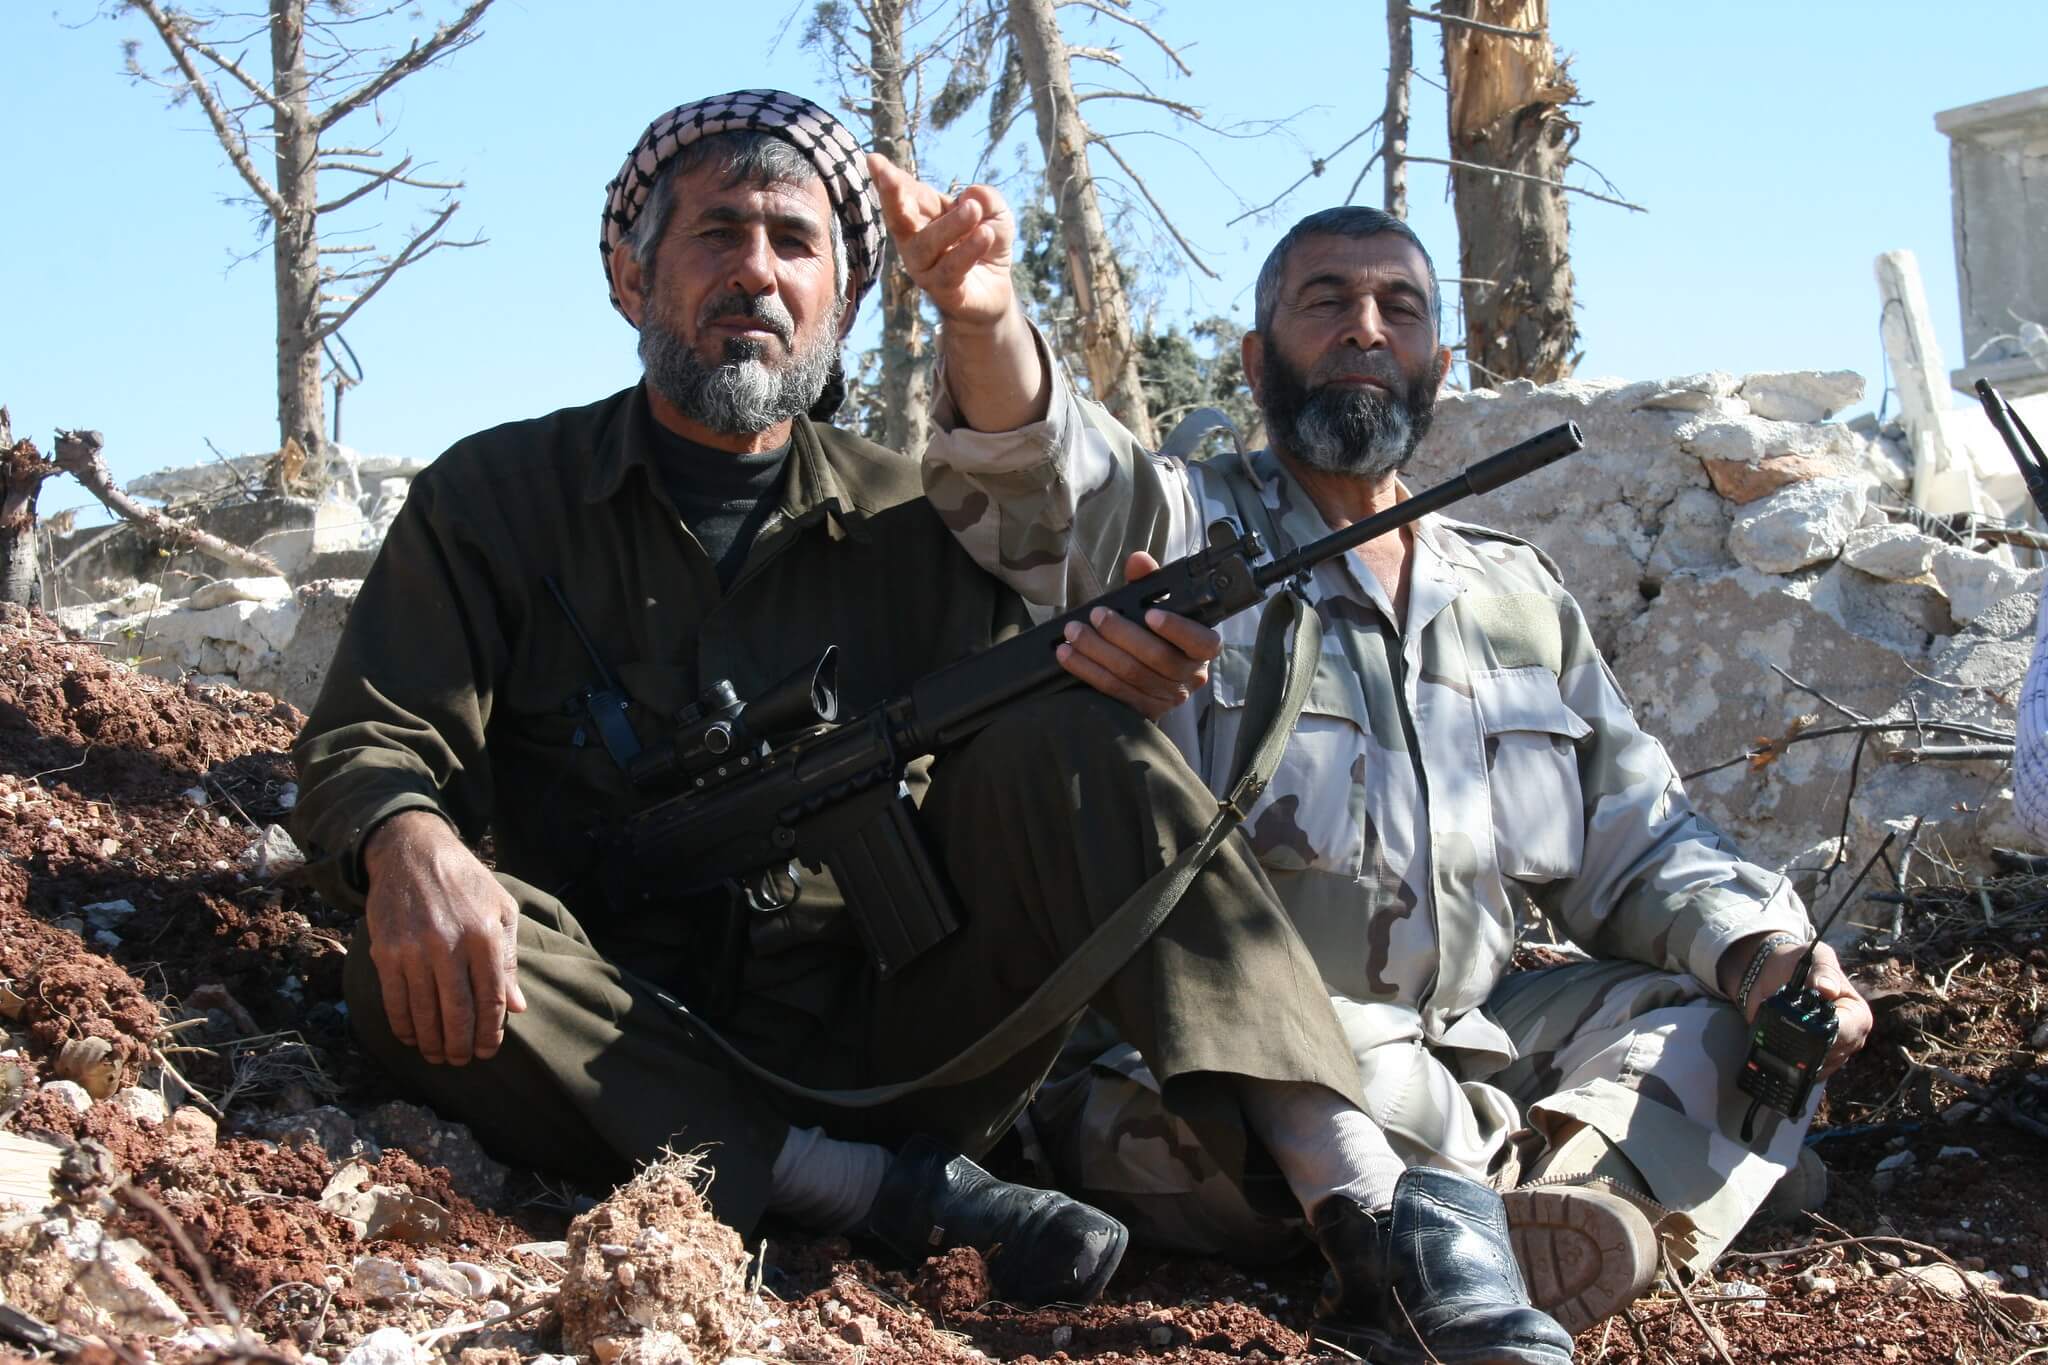 Armed rebels of the Sham Falcons Brigades in Syria, 2013. © David Axe-Flickr